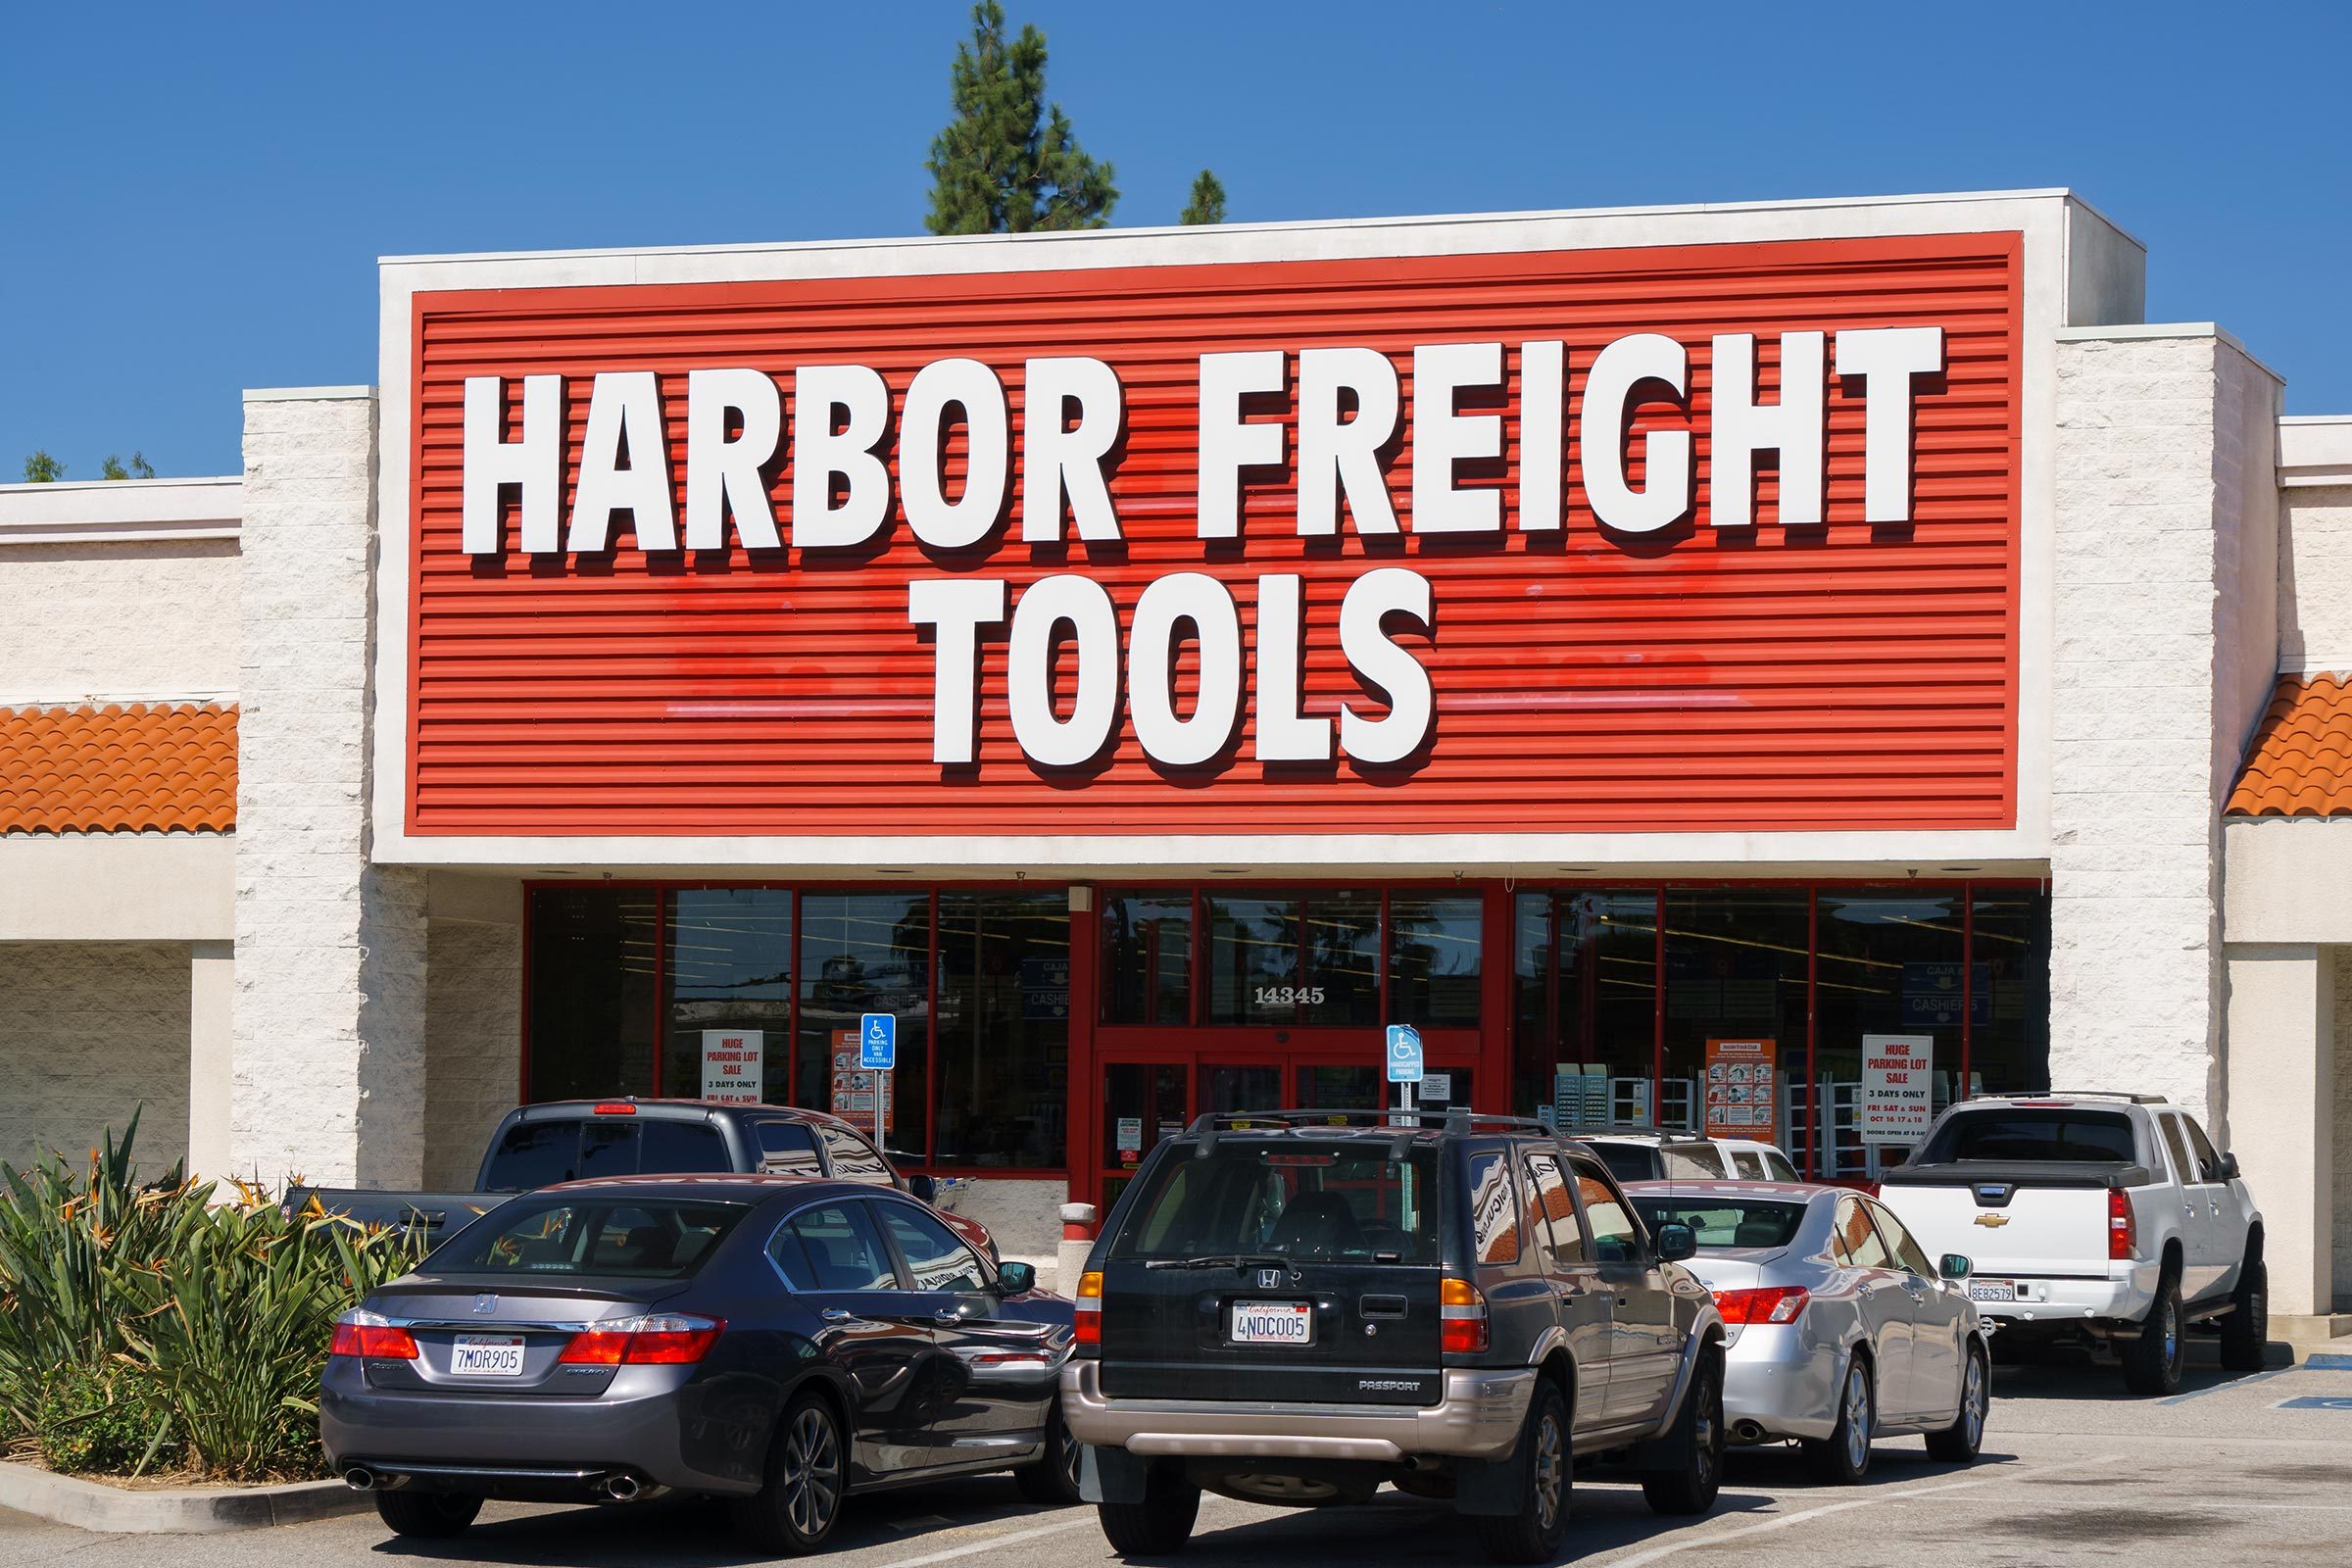 15 Things Harbor Freight Employees Won't Tell You